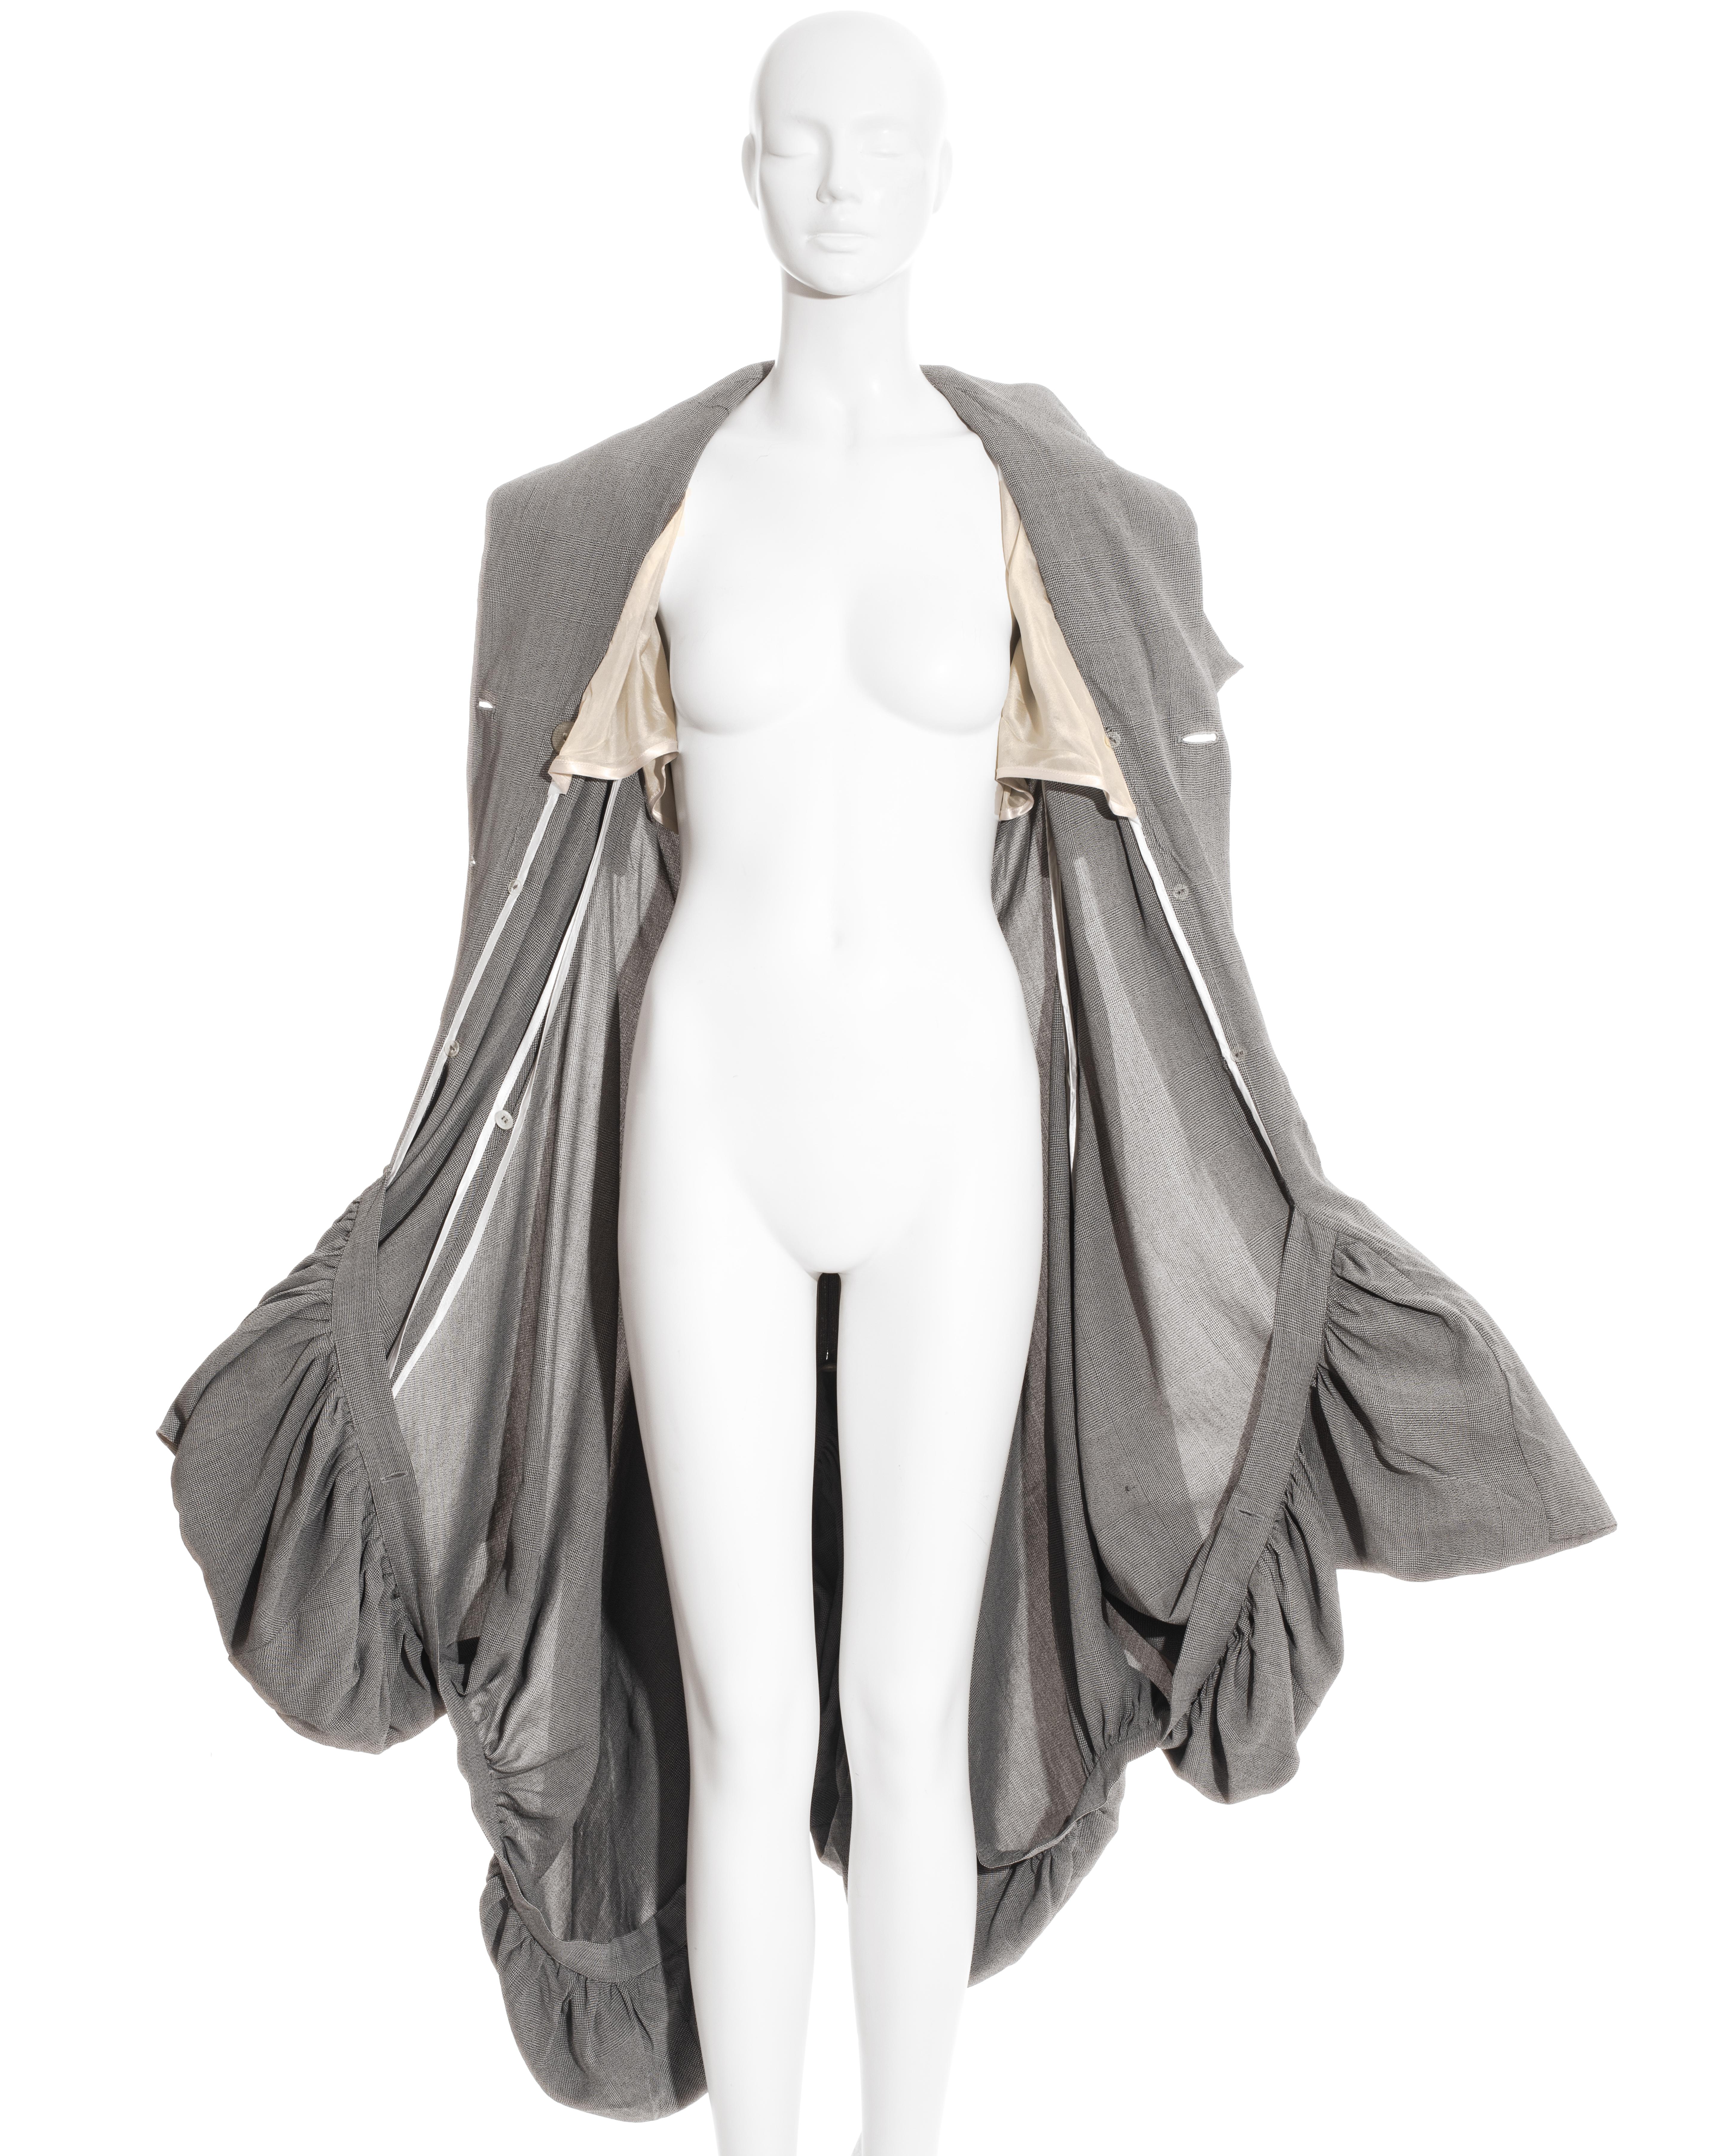 Women's John Galliano grey rayon checked Blanche Dubois bustled coat dress, ss 1988 For Sale